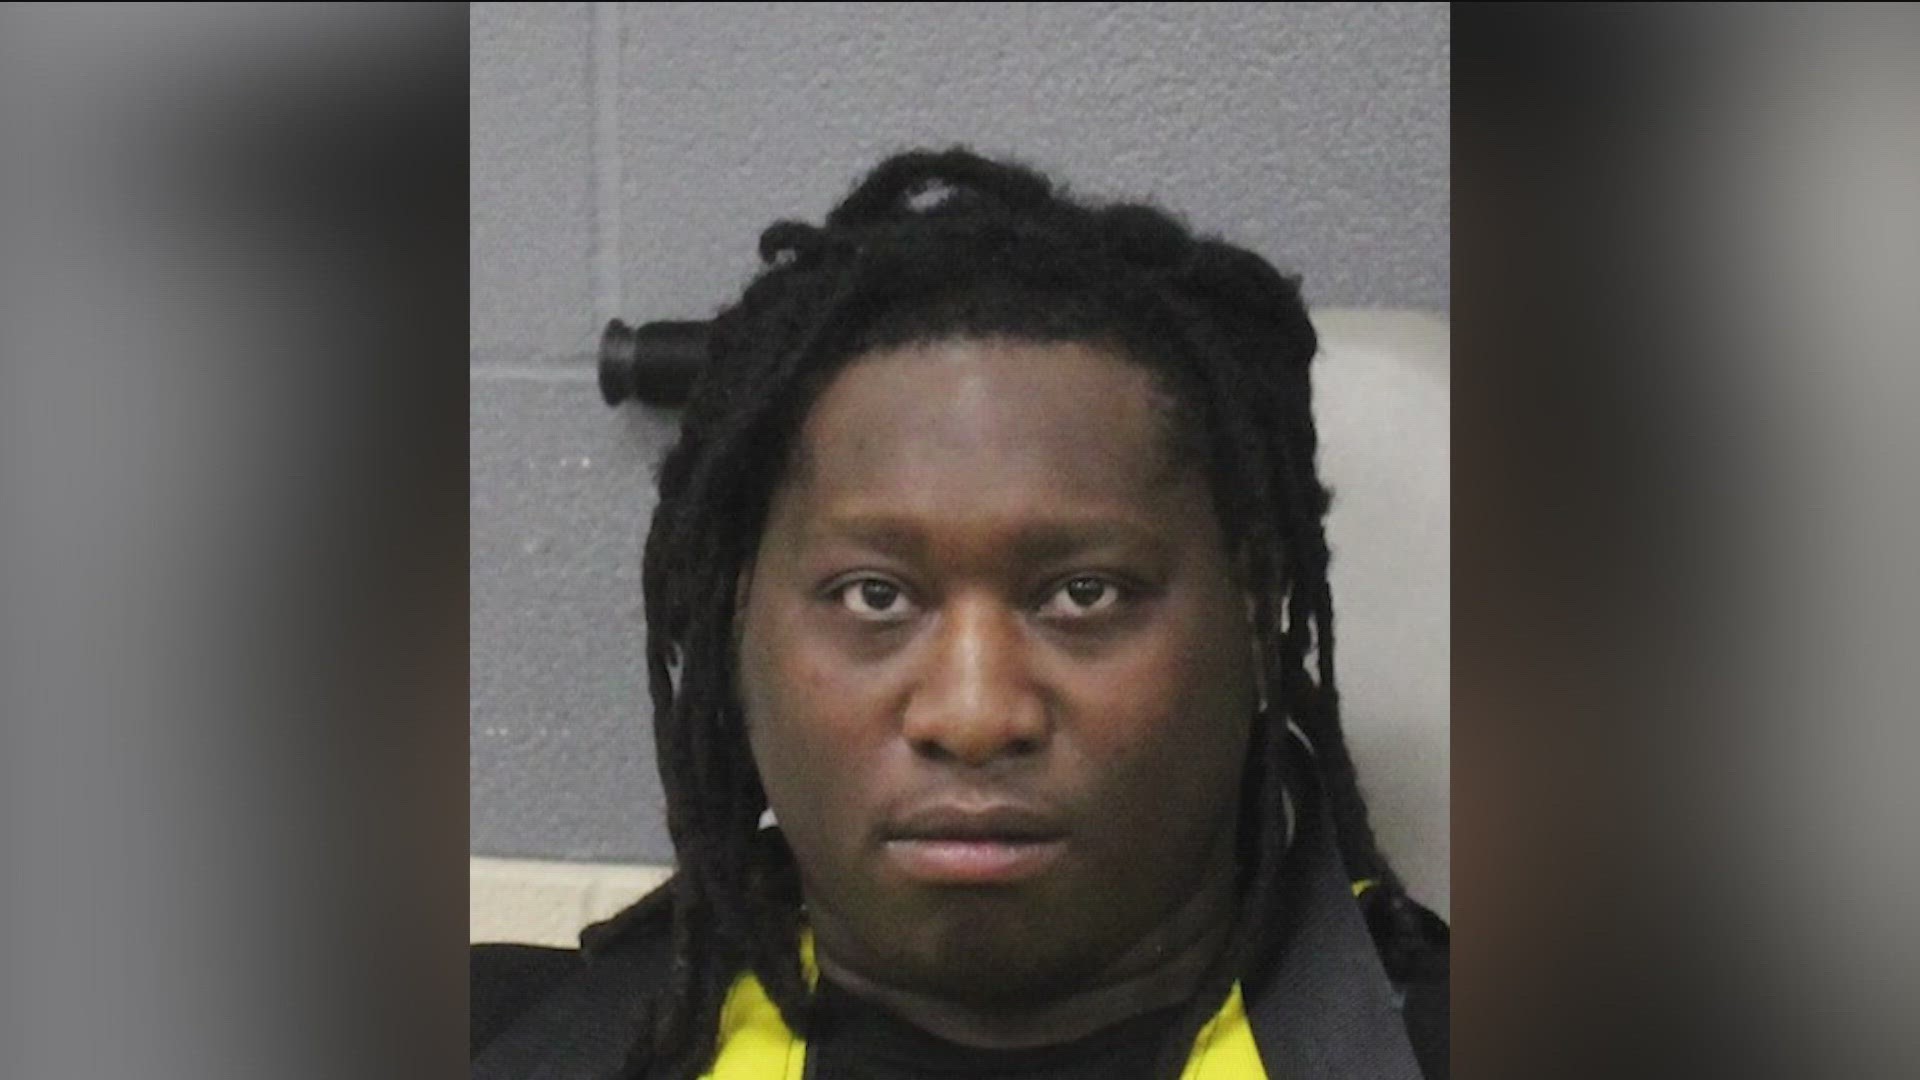 Tyrone Thompson, 23, is accused of hitting two pedestrians at East Seventh and Red River streets on March 12. He was later arrested following a separate crash.